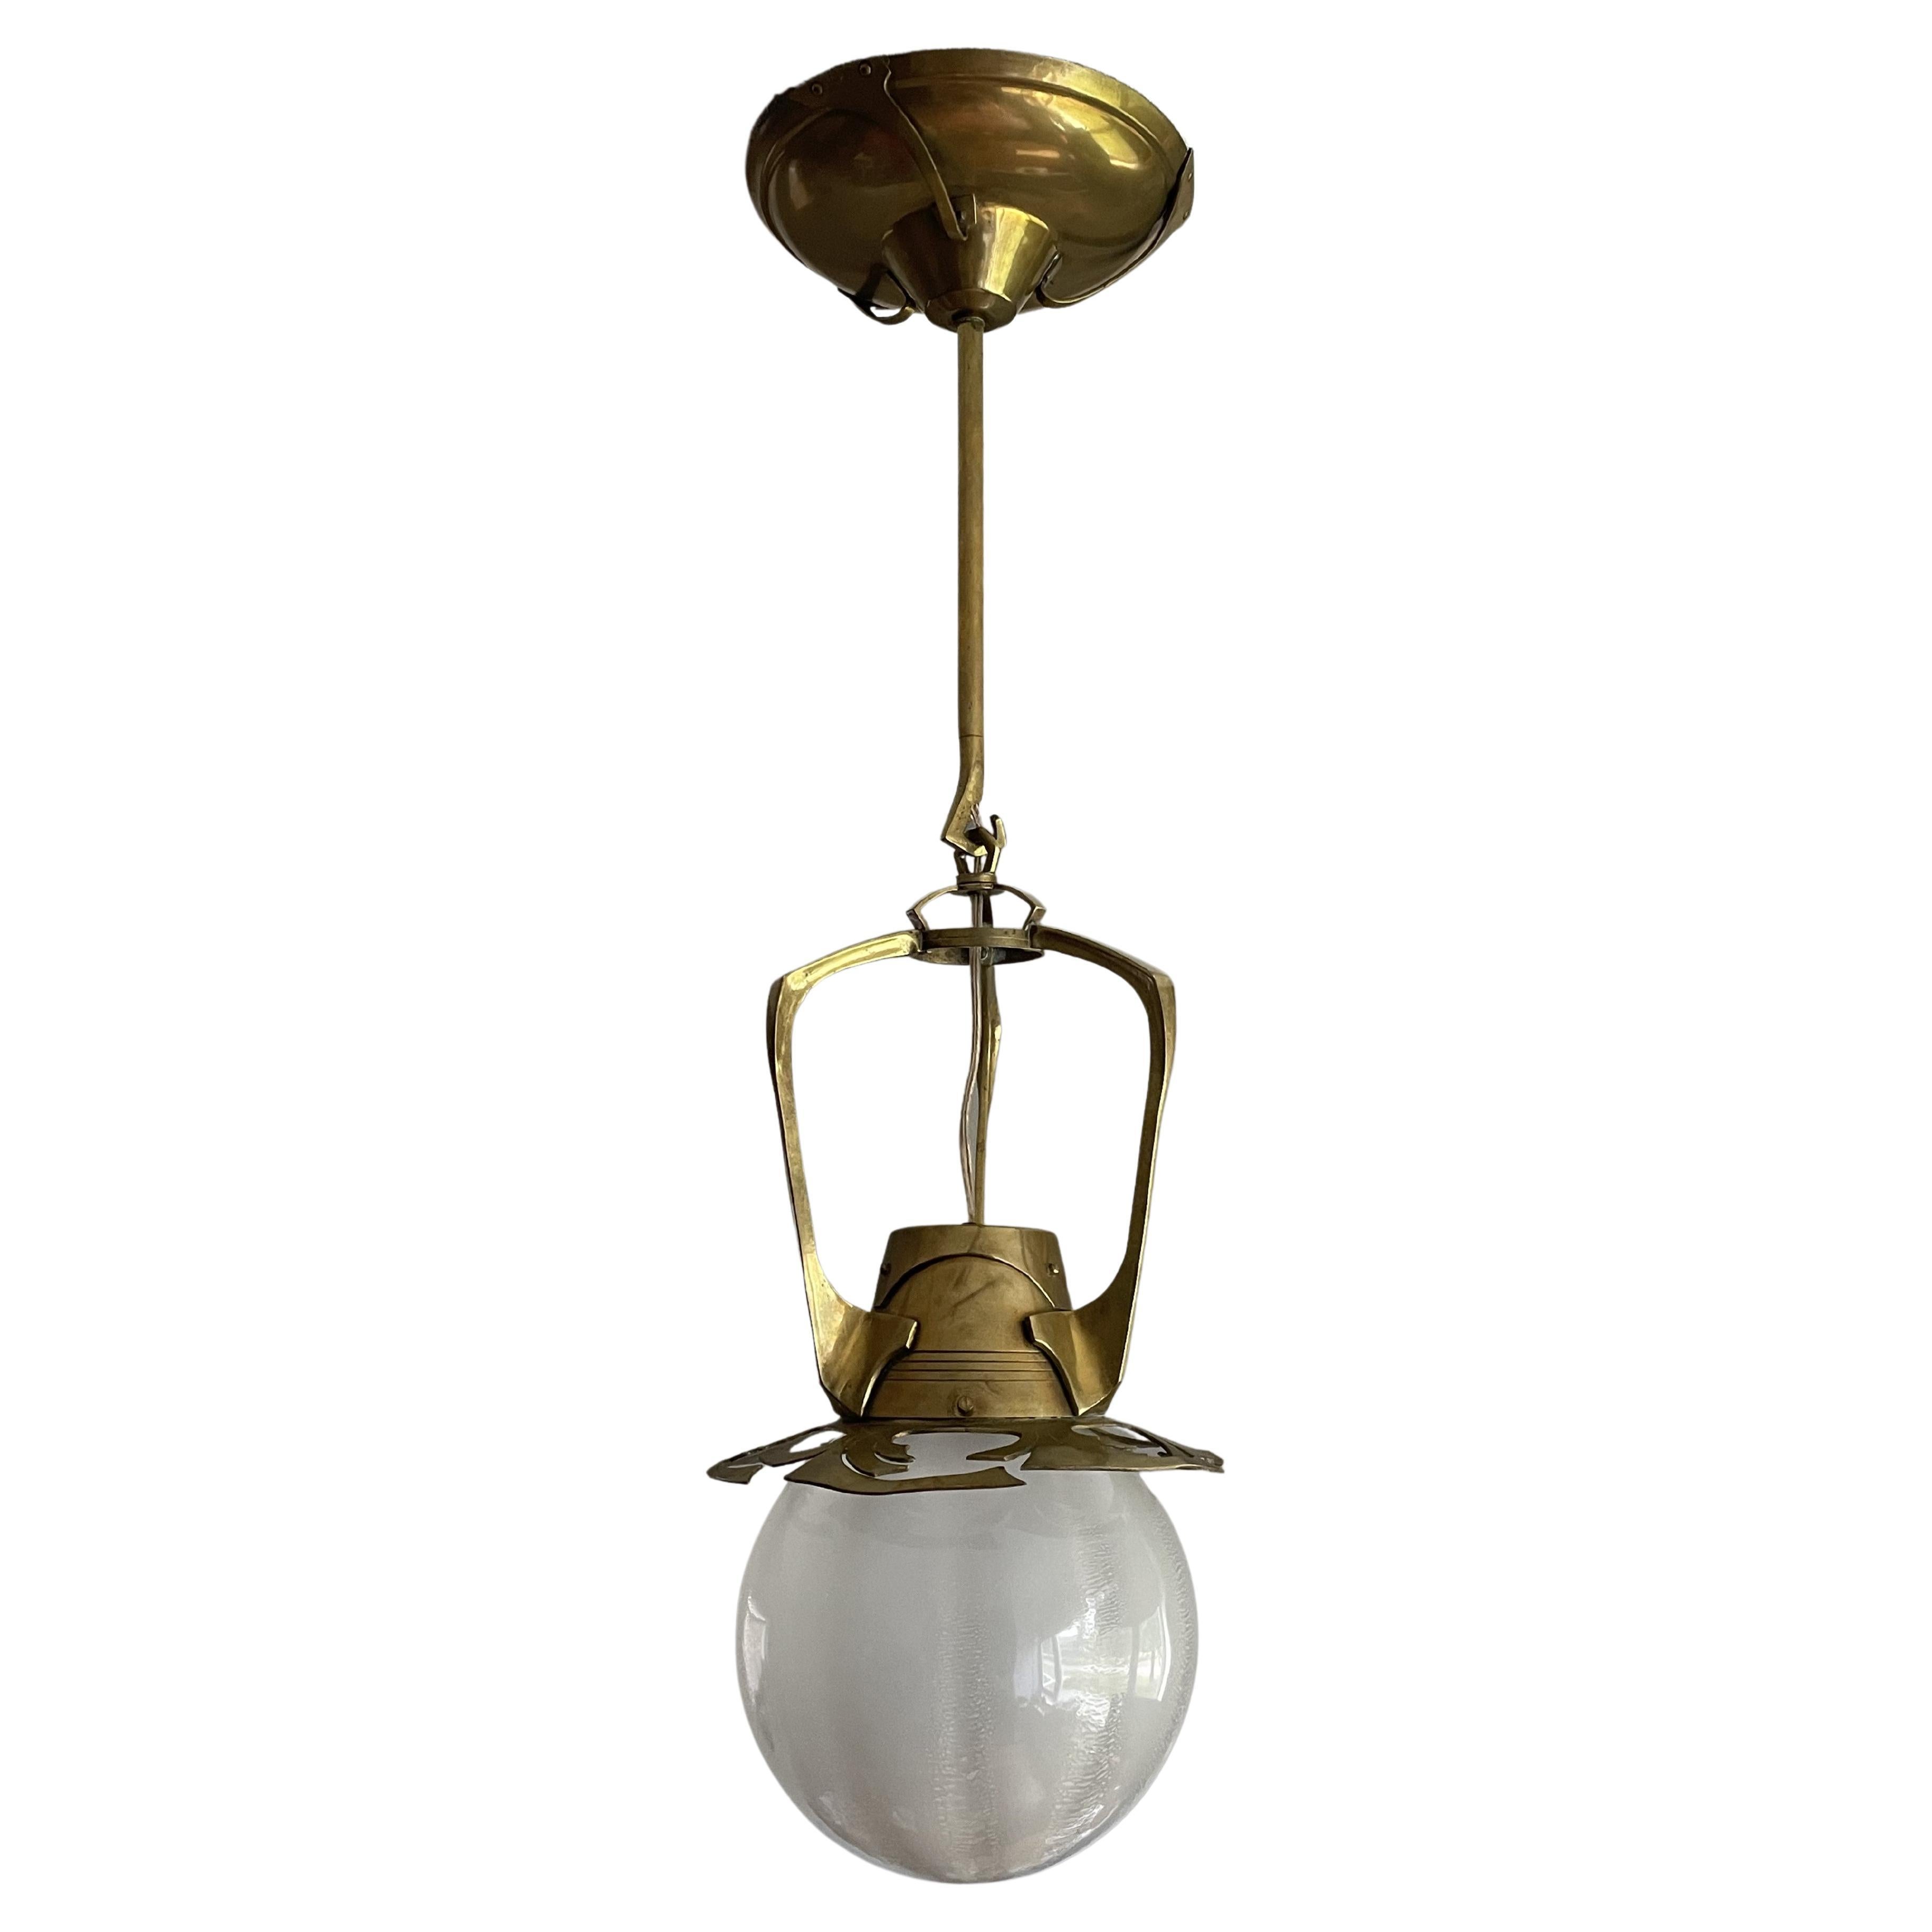 Unique Dutch Arts & Crafts Brass Pendant Light With Rare Tin Crackle Globe Shade For Sale